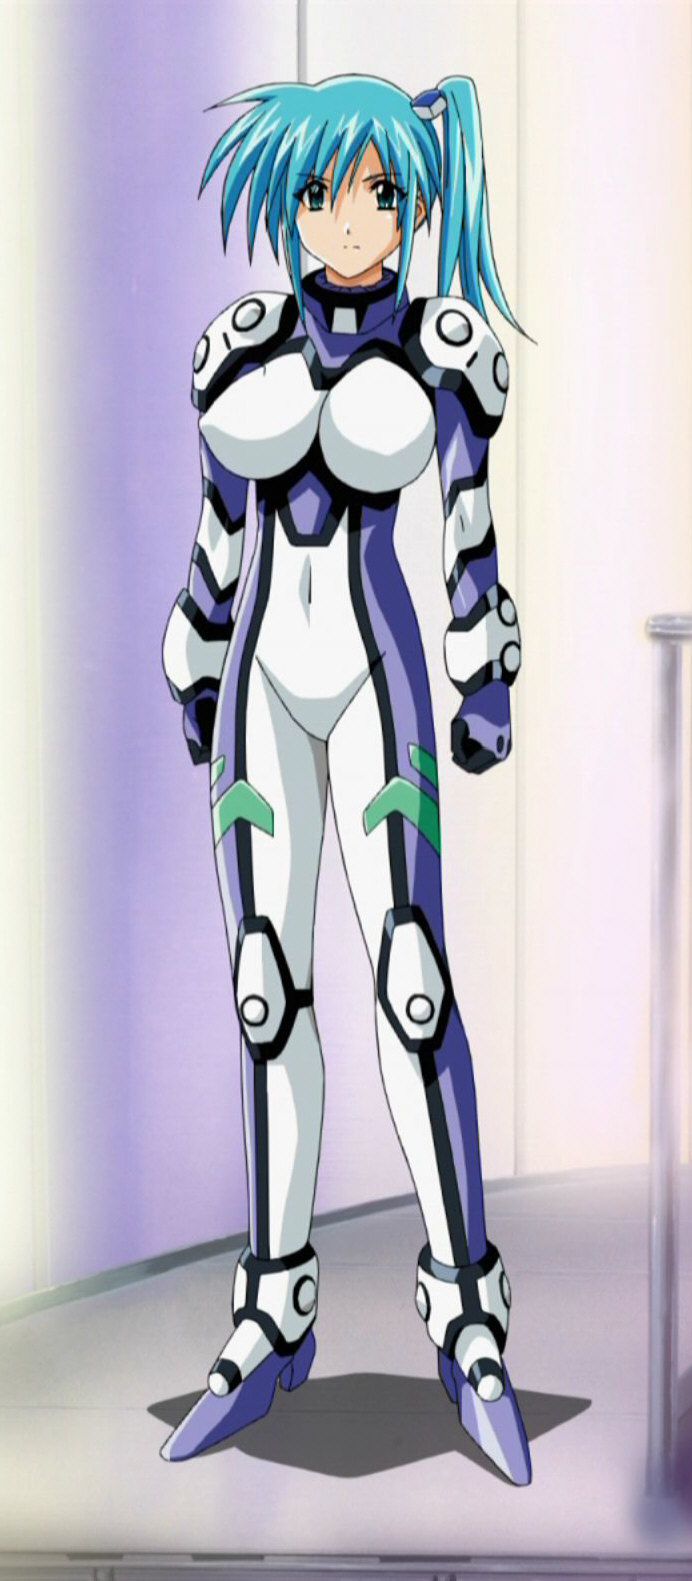 Pitchipichi's adhesion suit wedgie the secondary image of a girl who can see nipples, breasts, crotch, wwww part12 [transformation heroine, plug suit, adhesion suit] 7